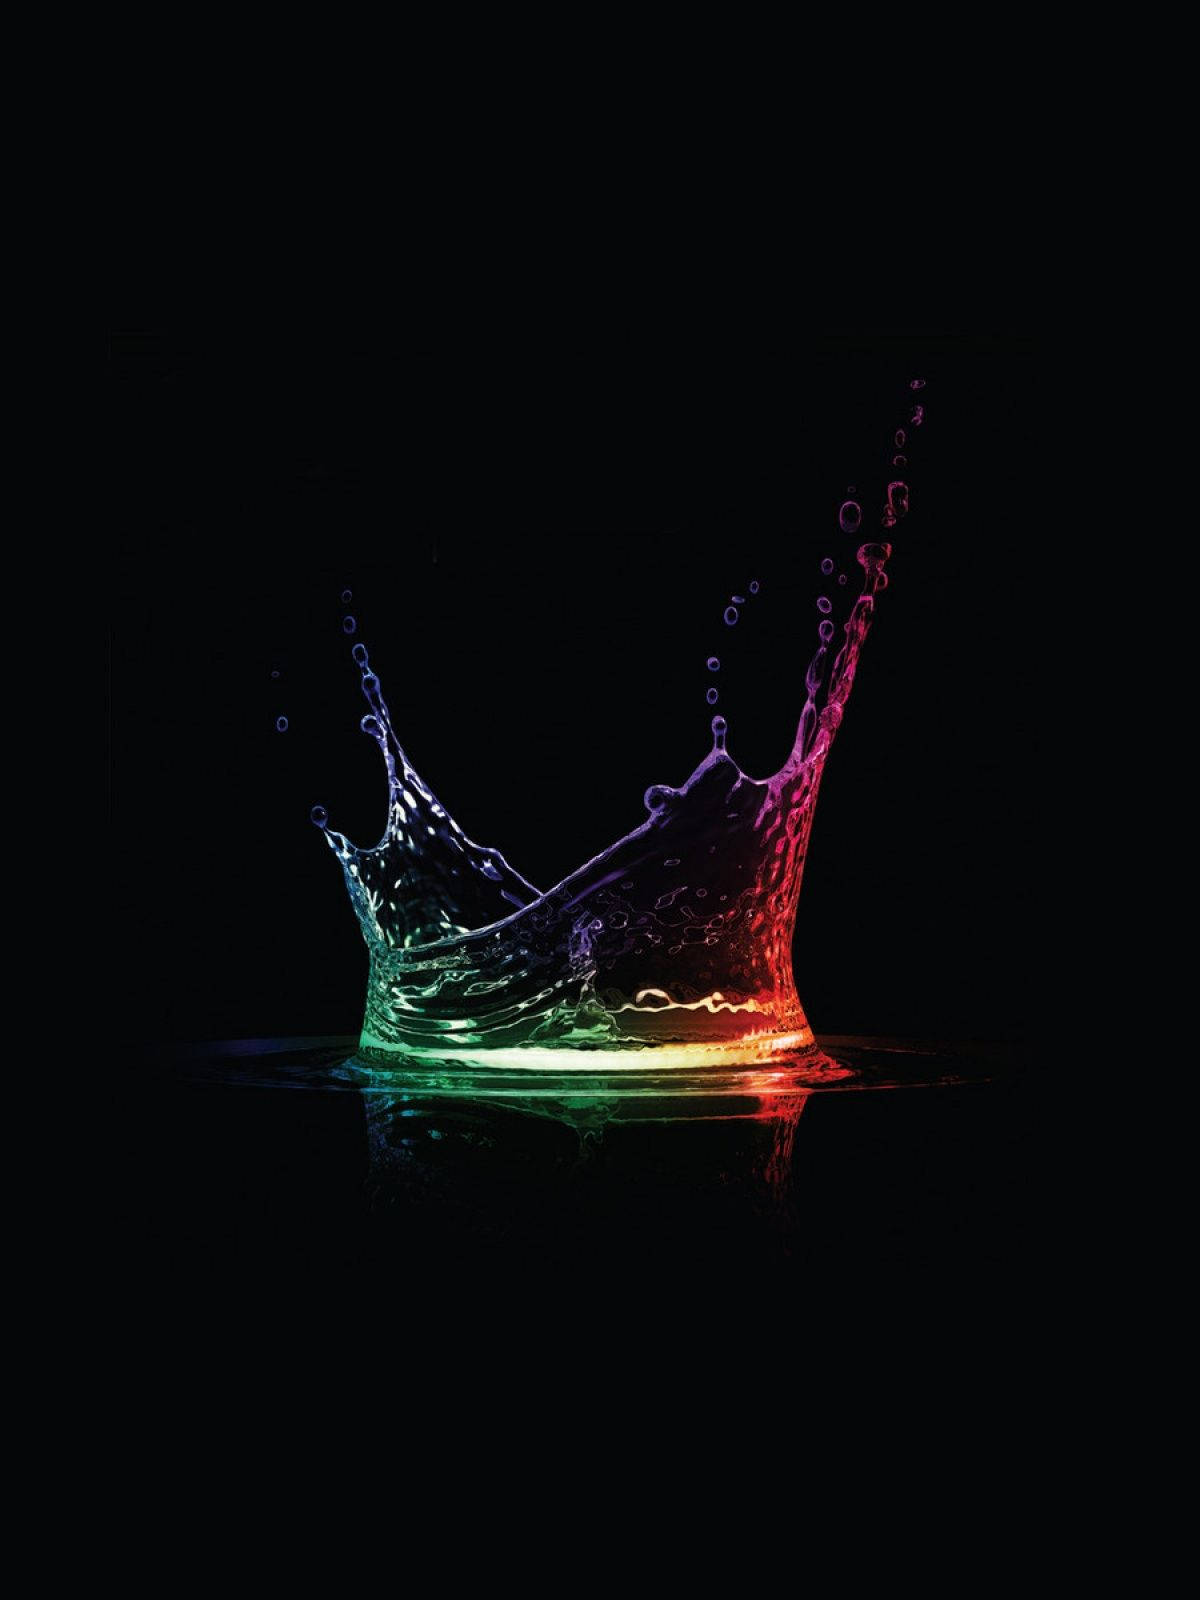 Black Android Colorful Water Splash Wallpaper